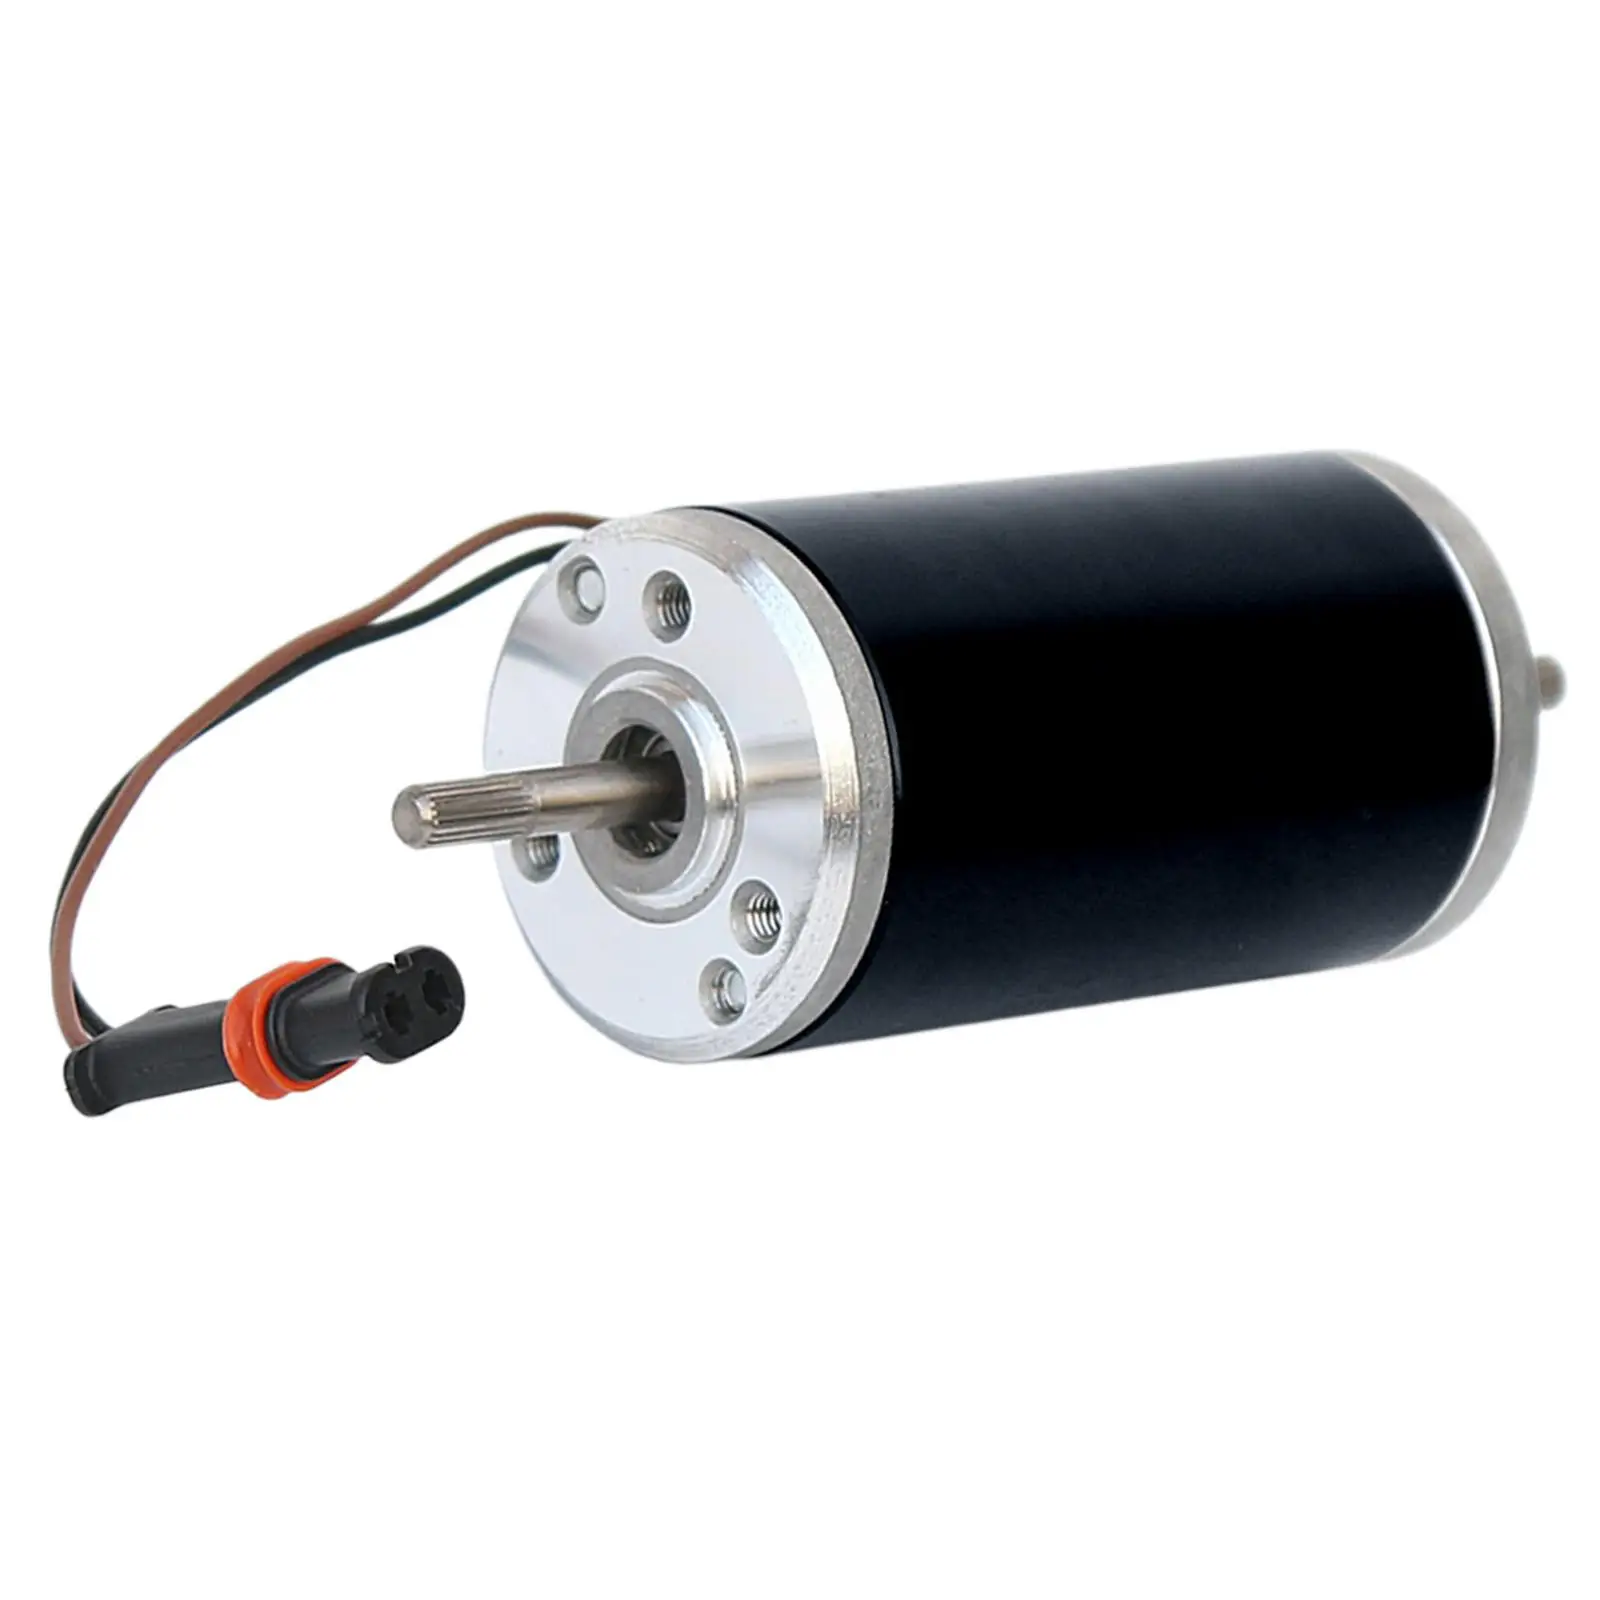 Parking Heater Blower Motor Stable Speed Low Power Consumption 12V 2.2A Copper Cores Mute for Airtronic D4 12V